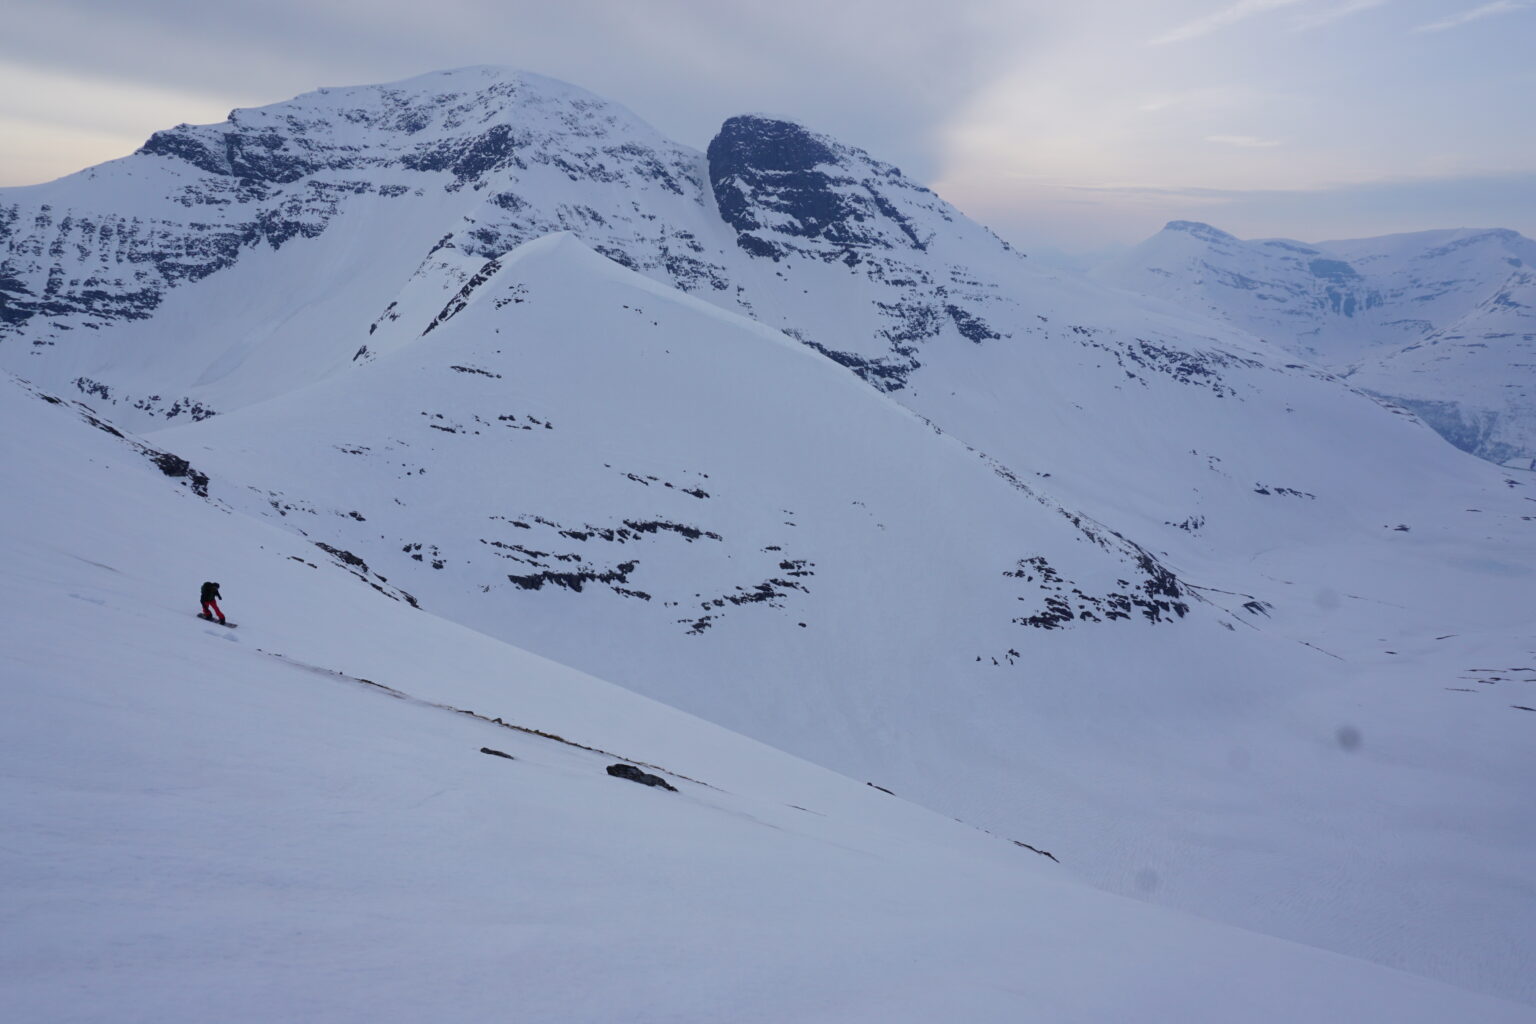 Our second run on the Melkefjellet and Istinden Ridge Traverse